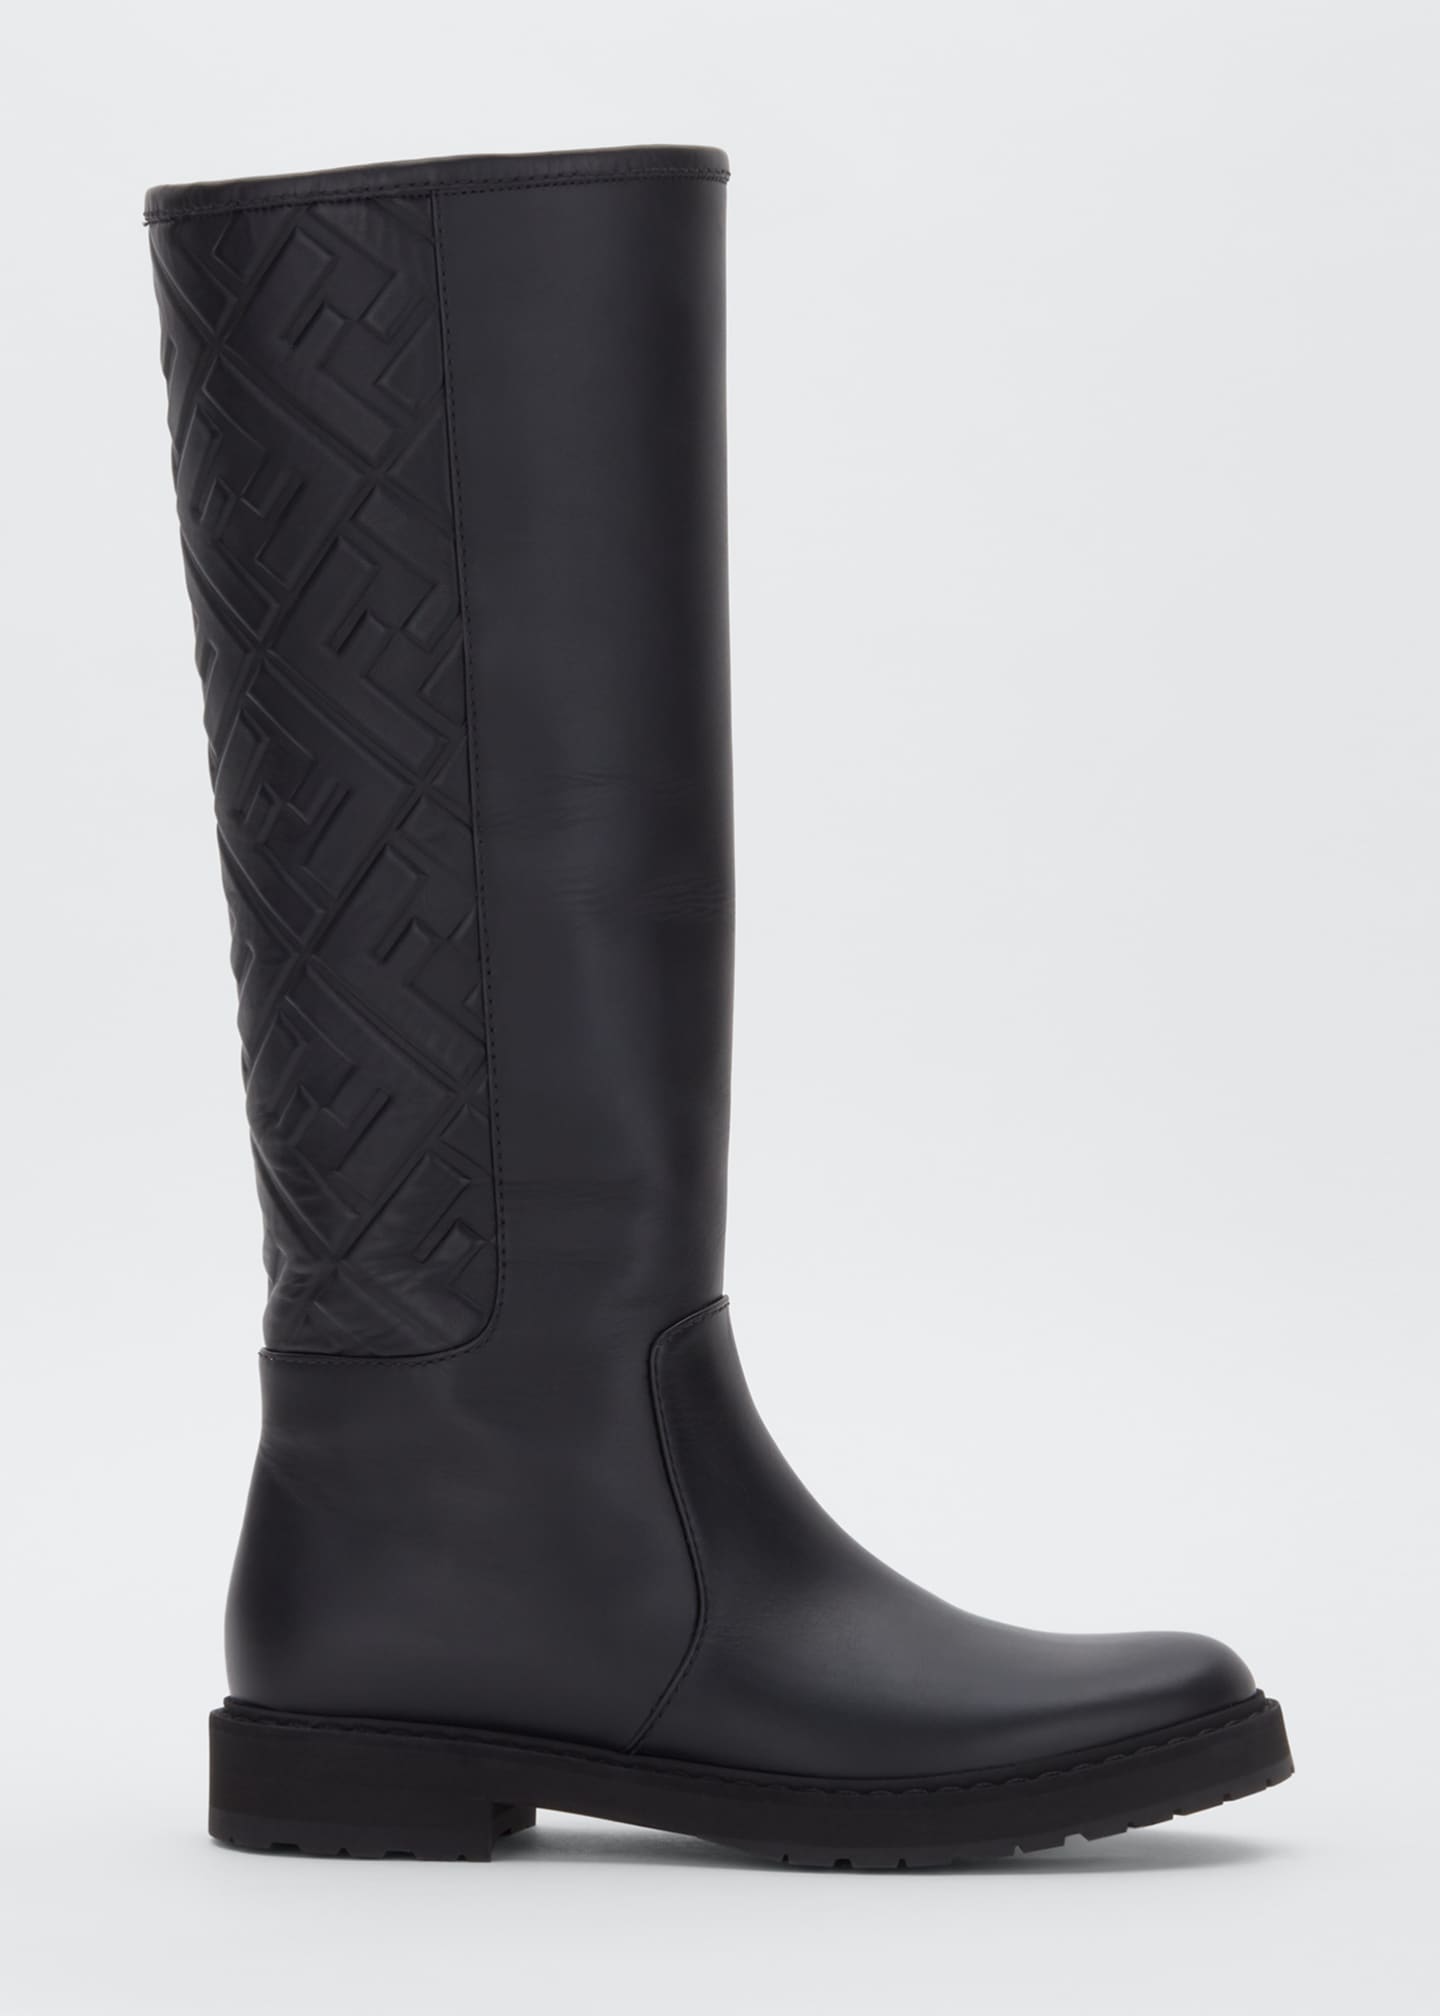 Fendi FF Leather Tall Riding Boots 